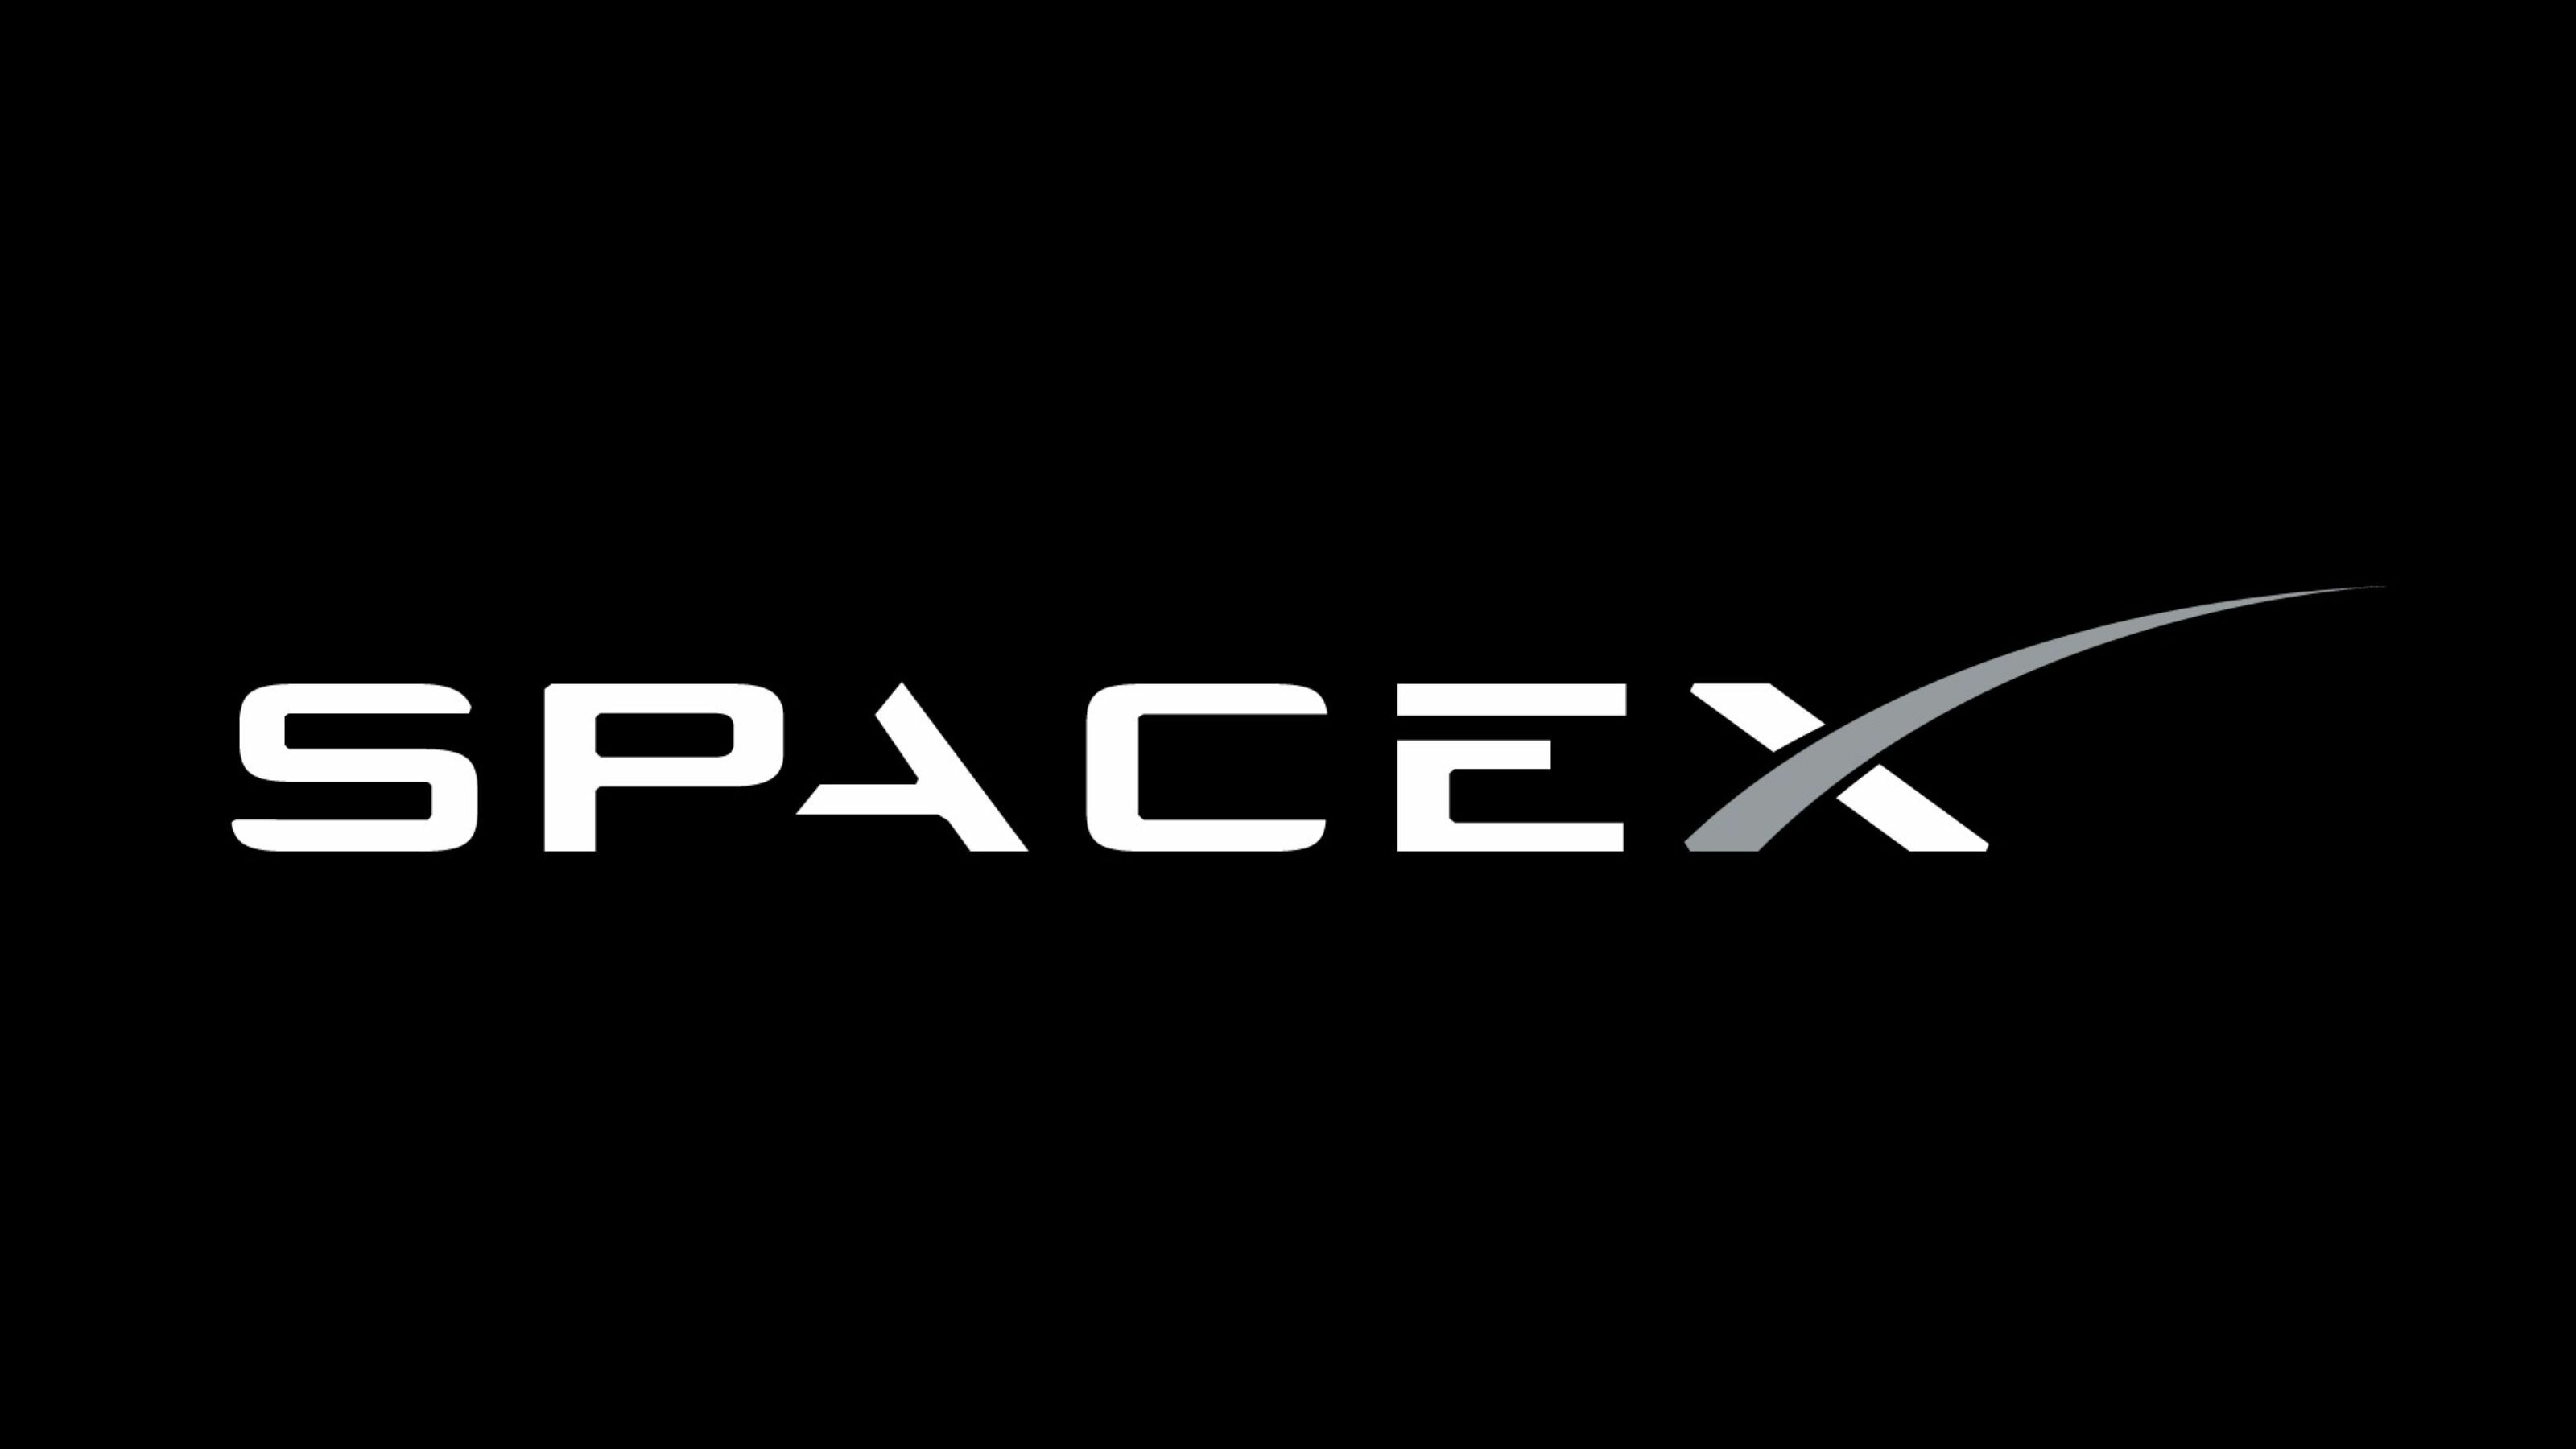 SpaceX: The company designs, manufactures and launches advanced rockets and spacecraft. 3200x1800 HD Wallpaper.